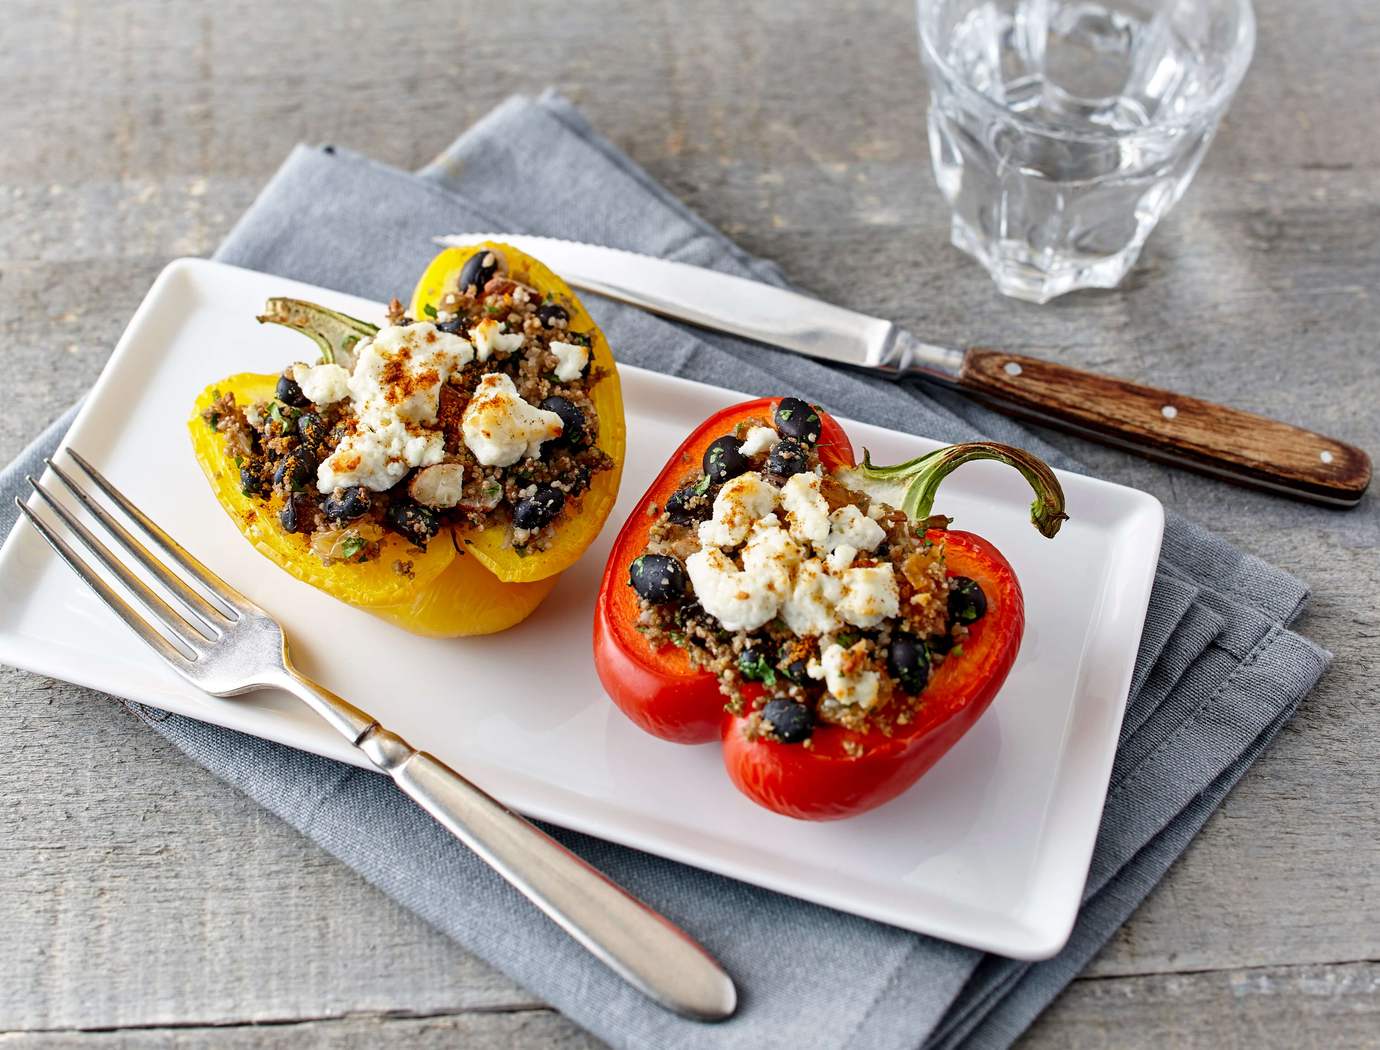 Stuffed peppers with couscous, dried fruit and almonds